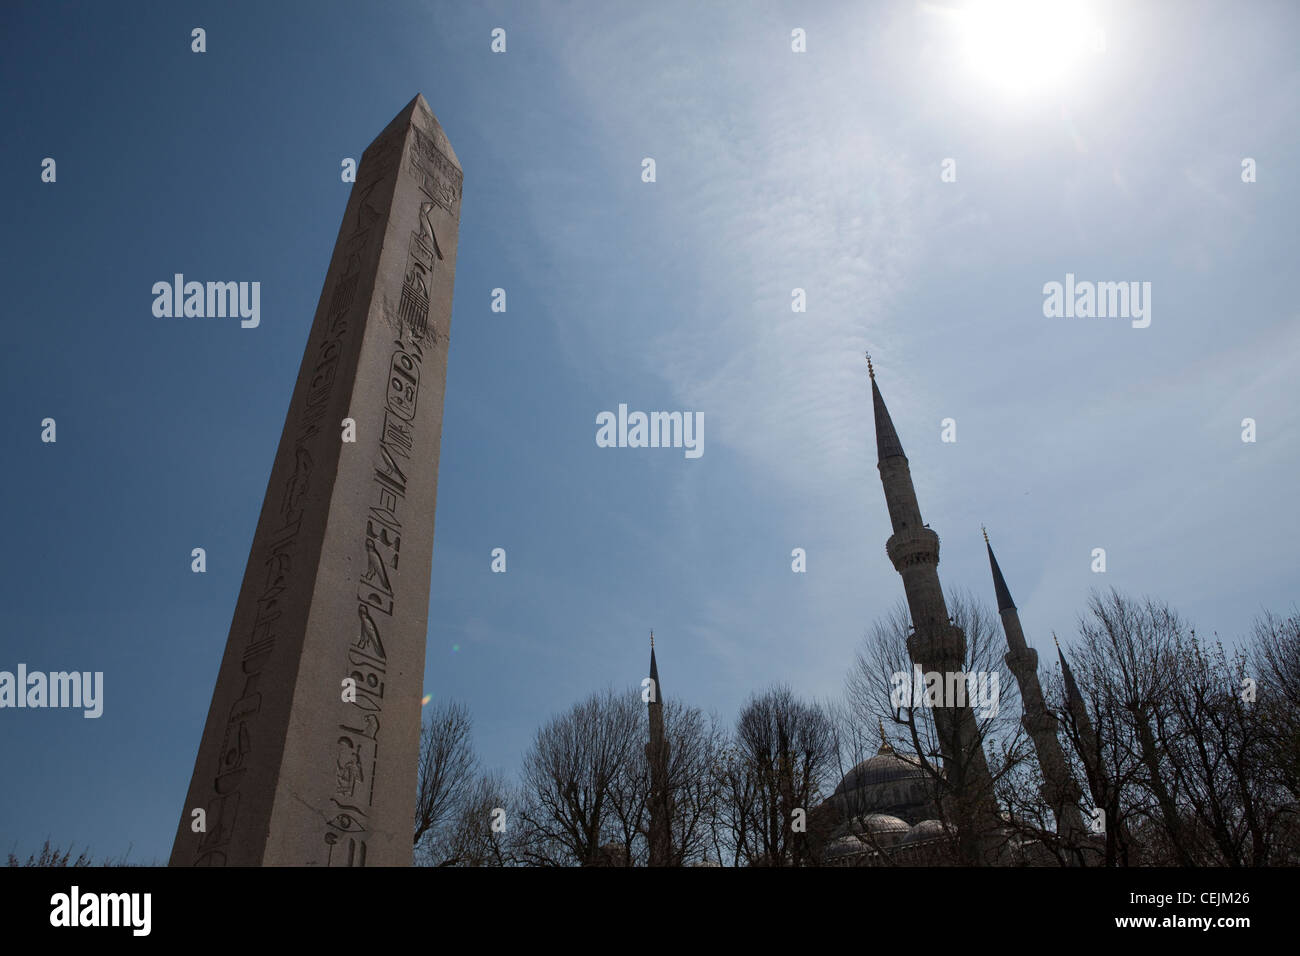 An ancient Egyptian obelisk stands in am Istanbul city square in Sultanahmet District. Stock Photo